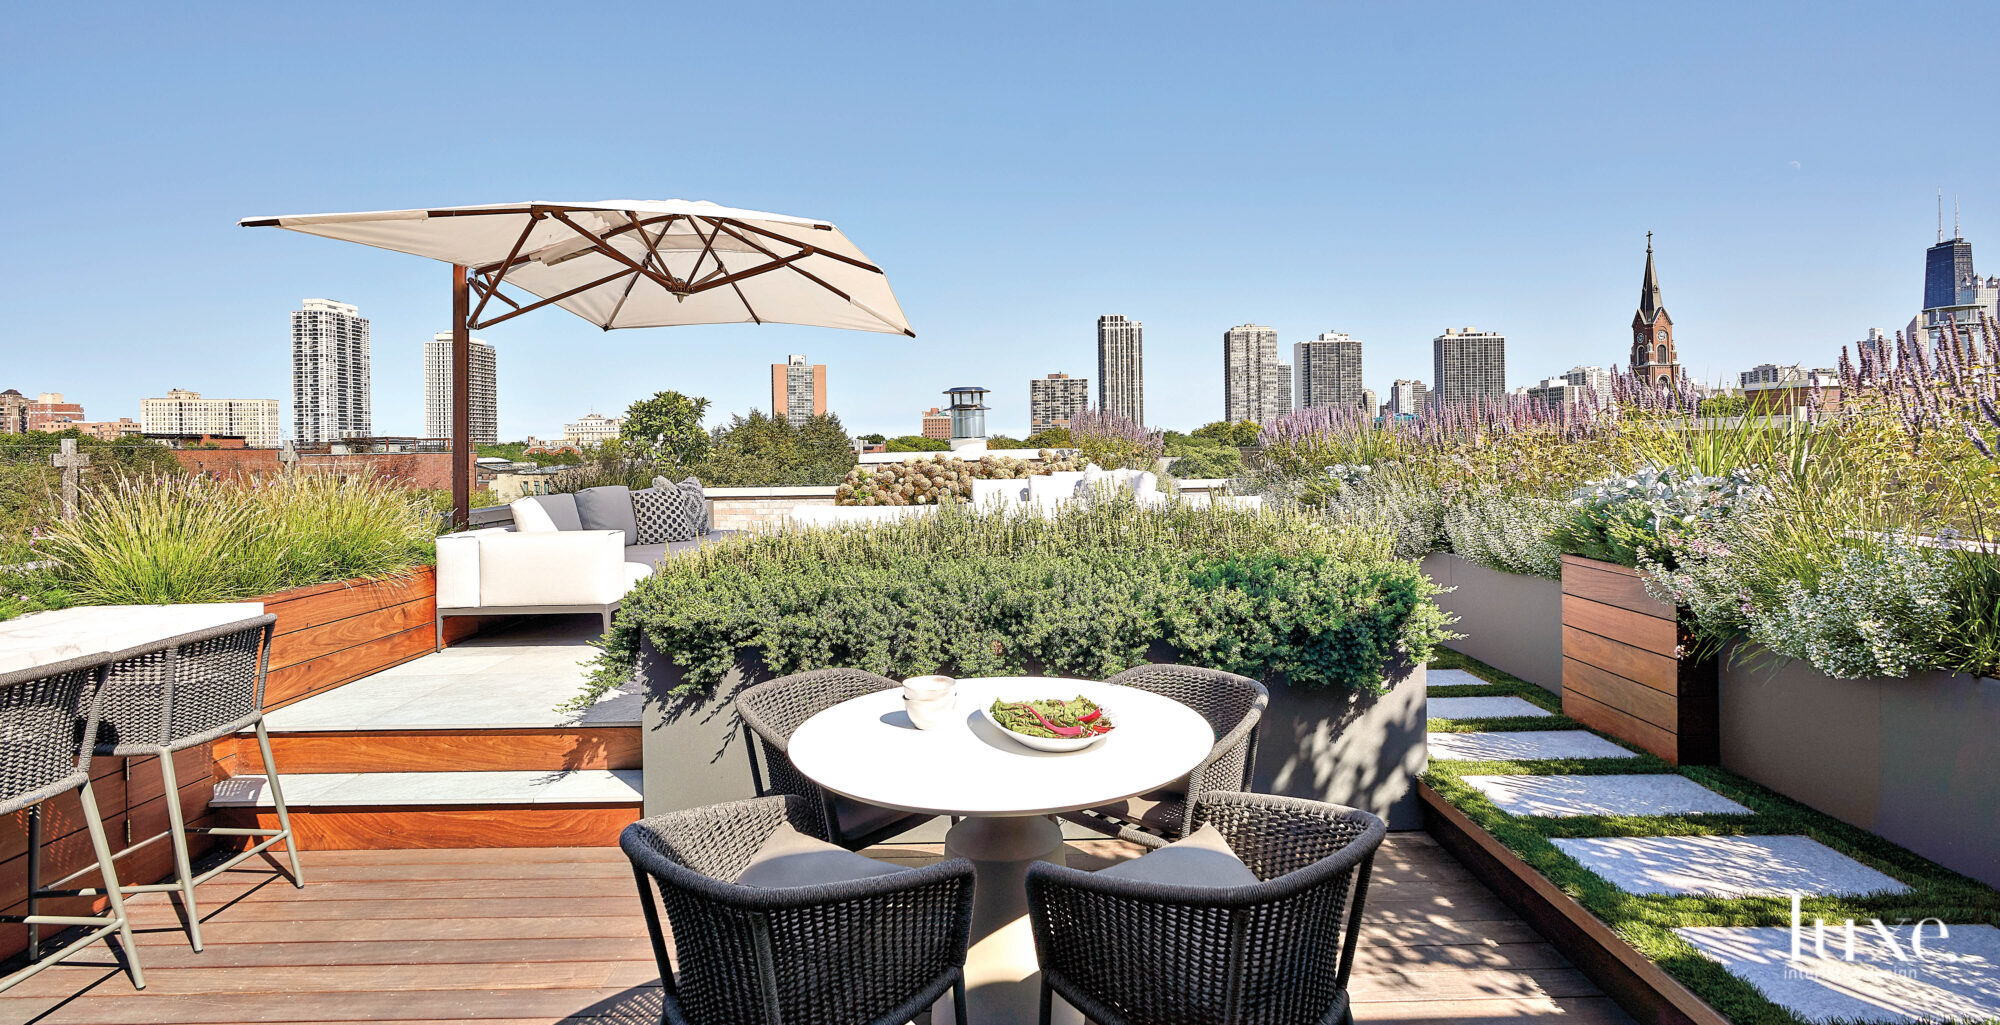 The rooftop deck has views of Chicago and several eating and sitting areas.